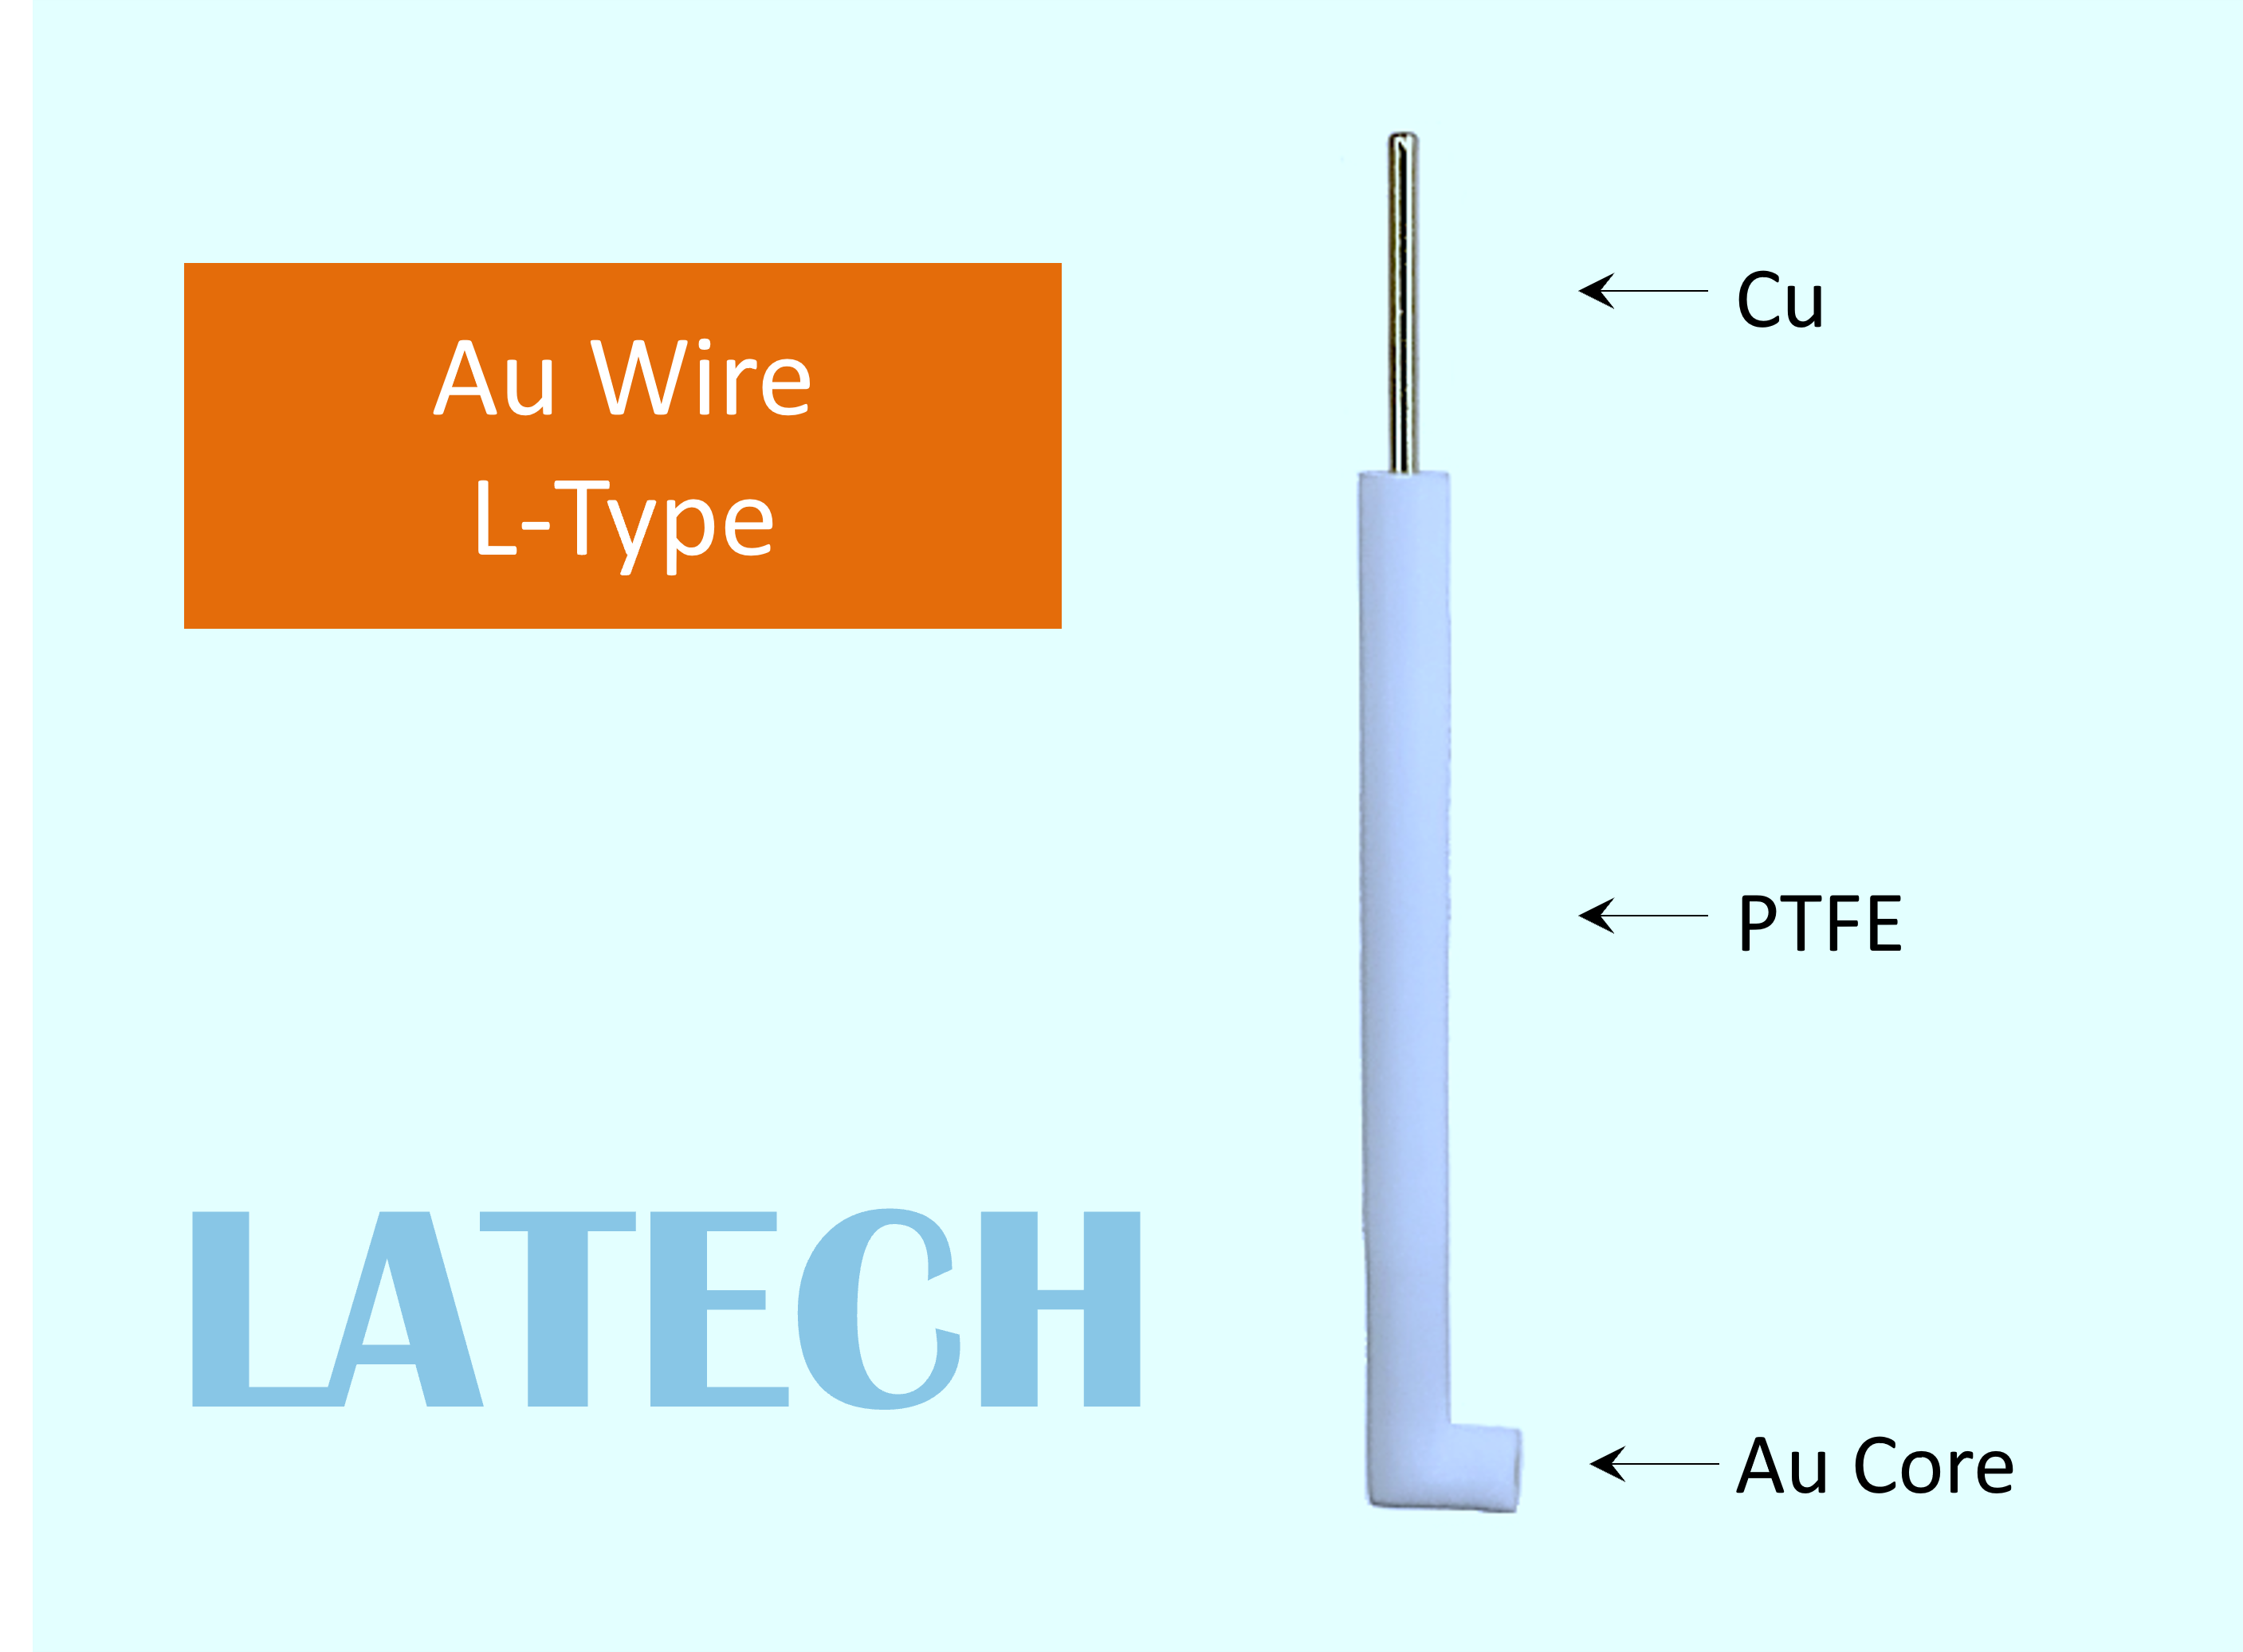 Au wire L-Type Latech.png